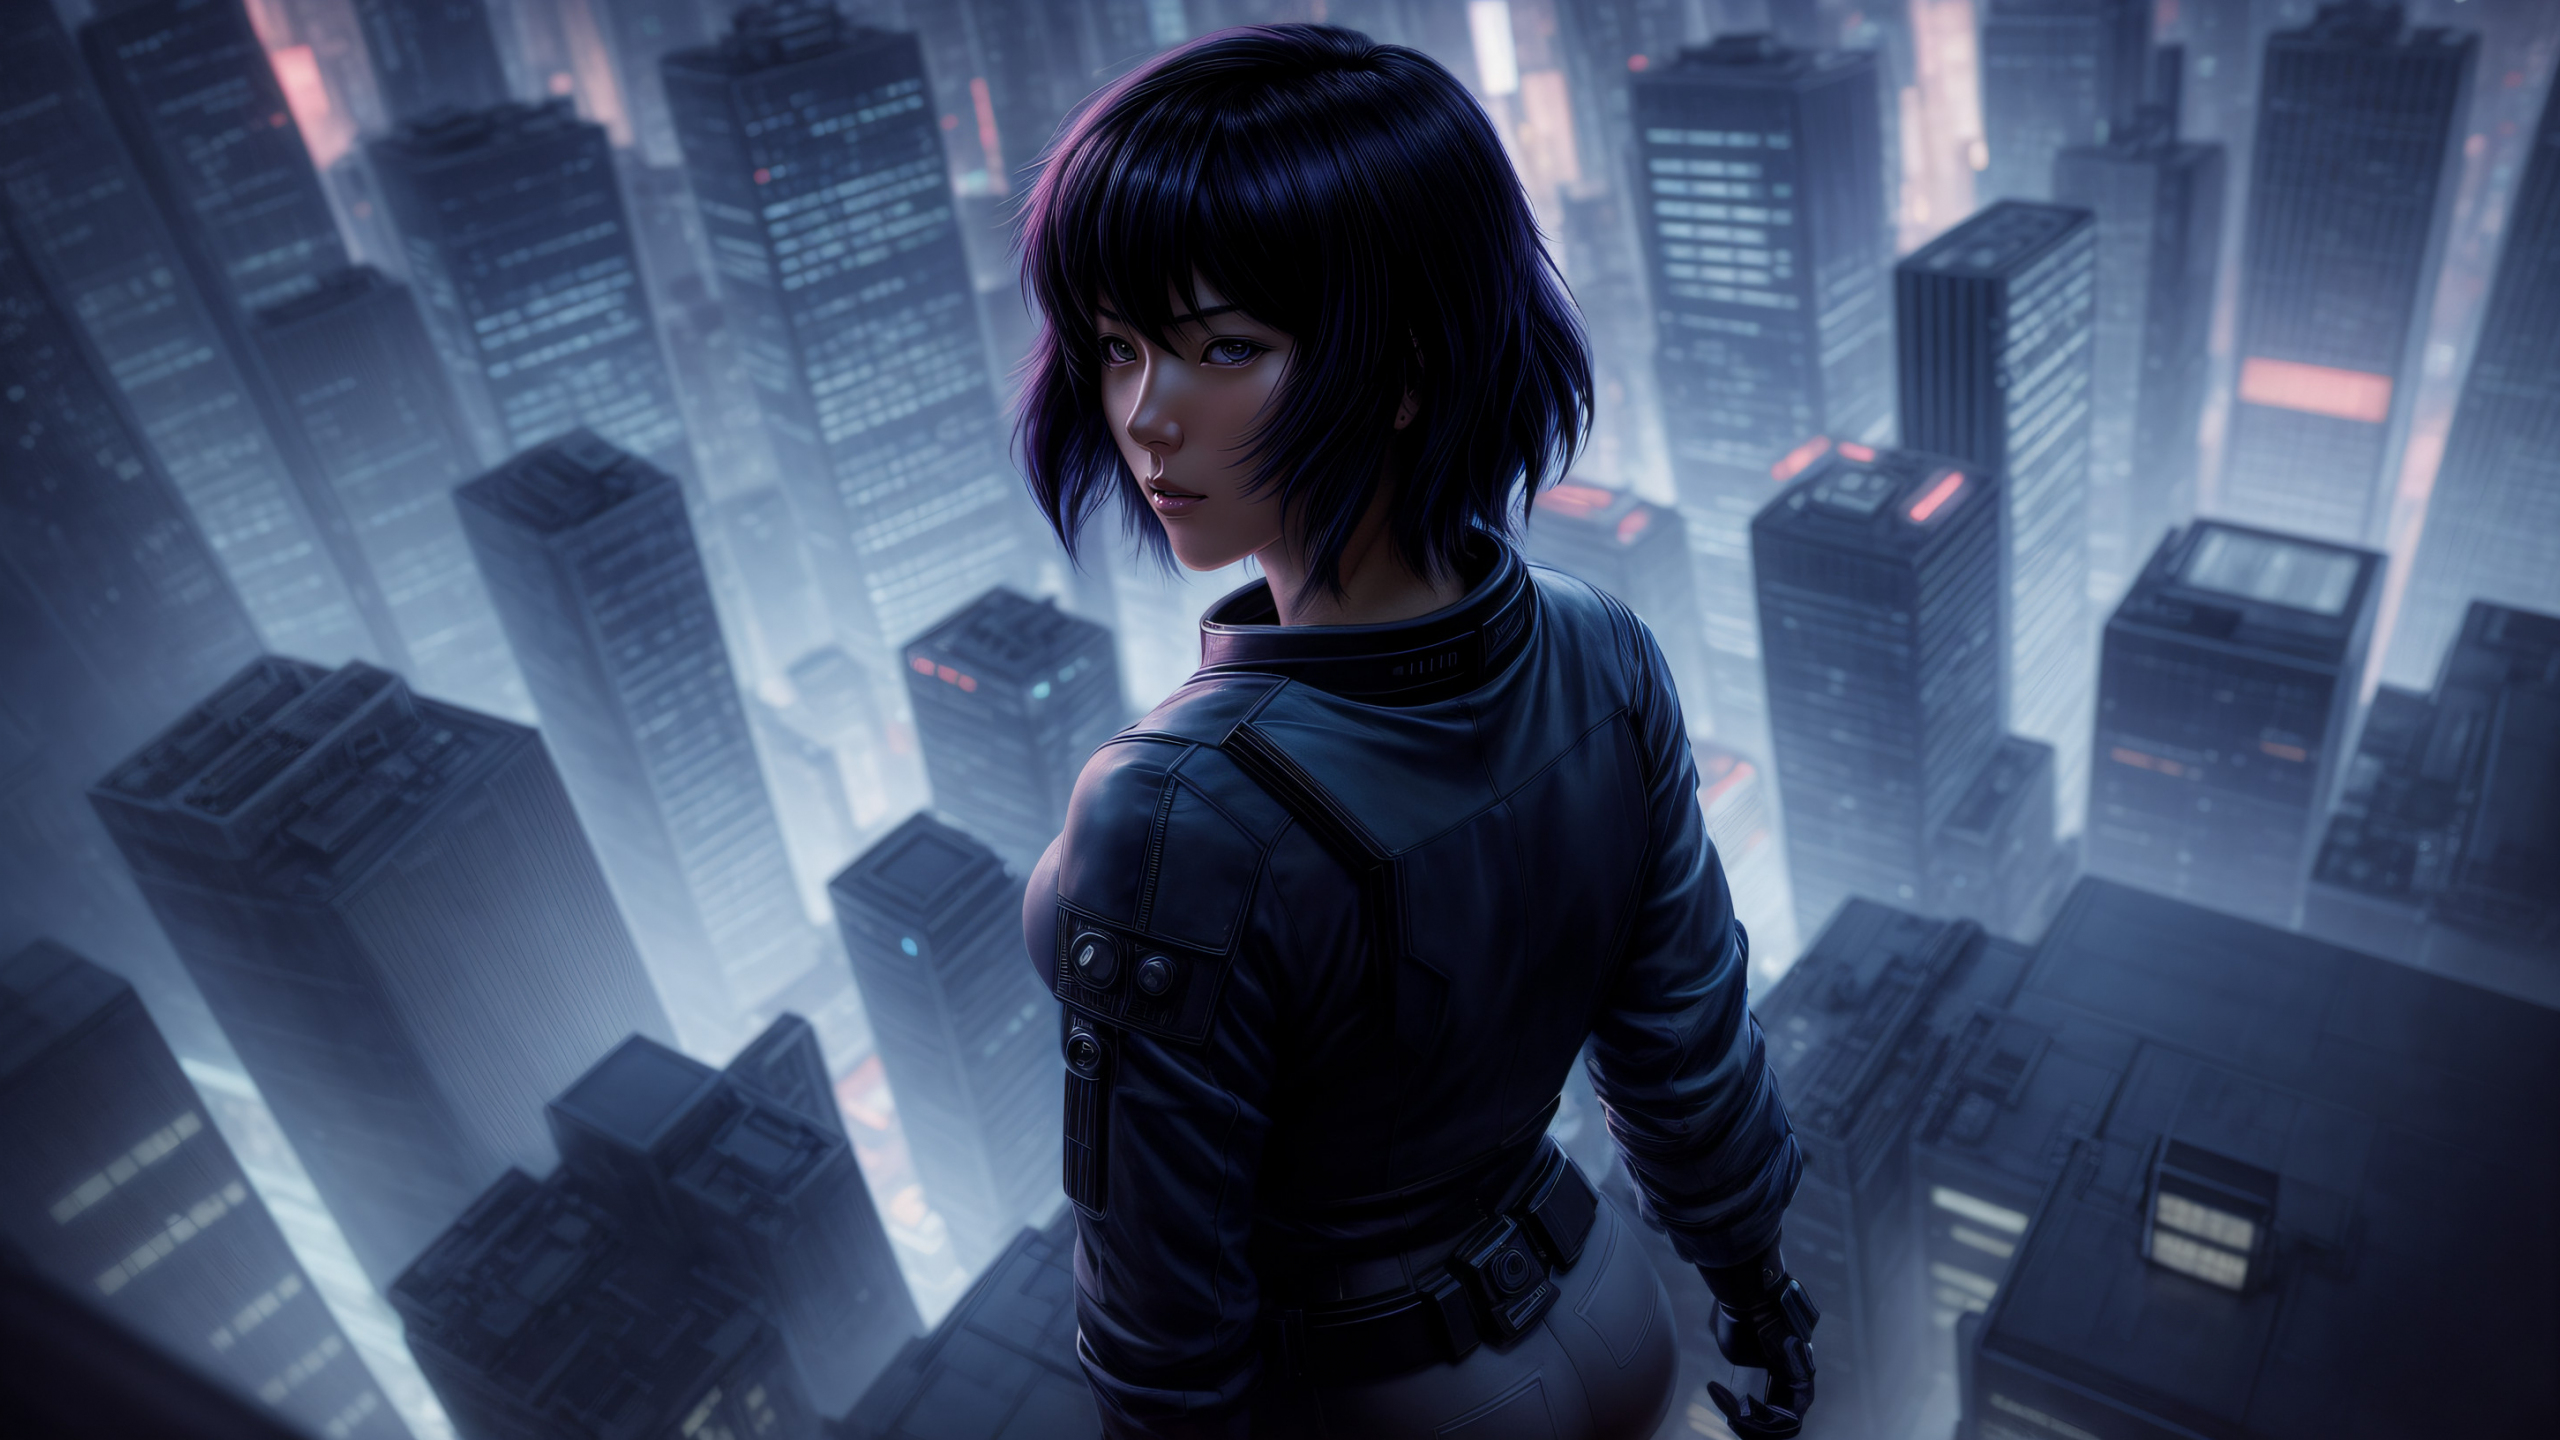 Beautiful girl, Ghost in the Shell, anime art, 2560x1440 wallpaper